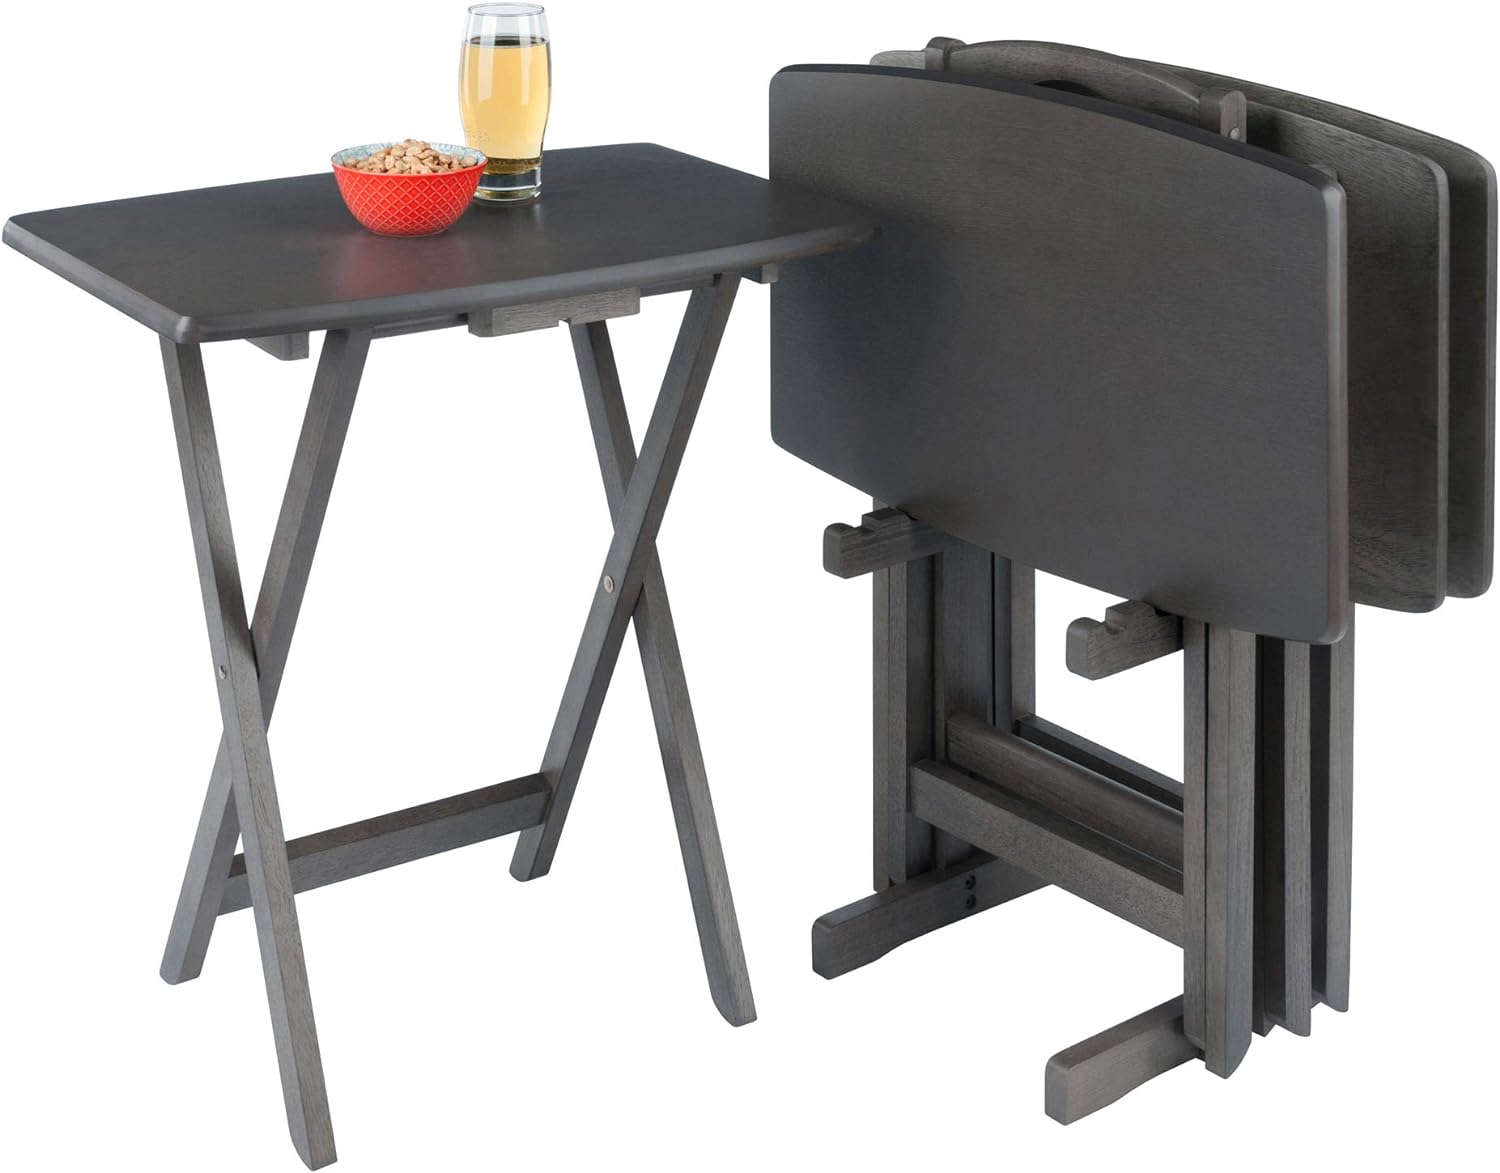 WINSOME Dorian Oversized Snack Table Set, Oyster Gray (Brown Base) (replace color may vary)., 23.62 x 15.75 x 25.51, 5pc